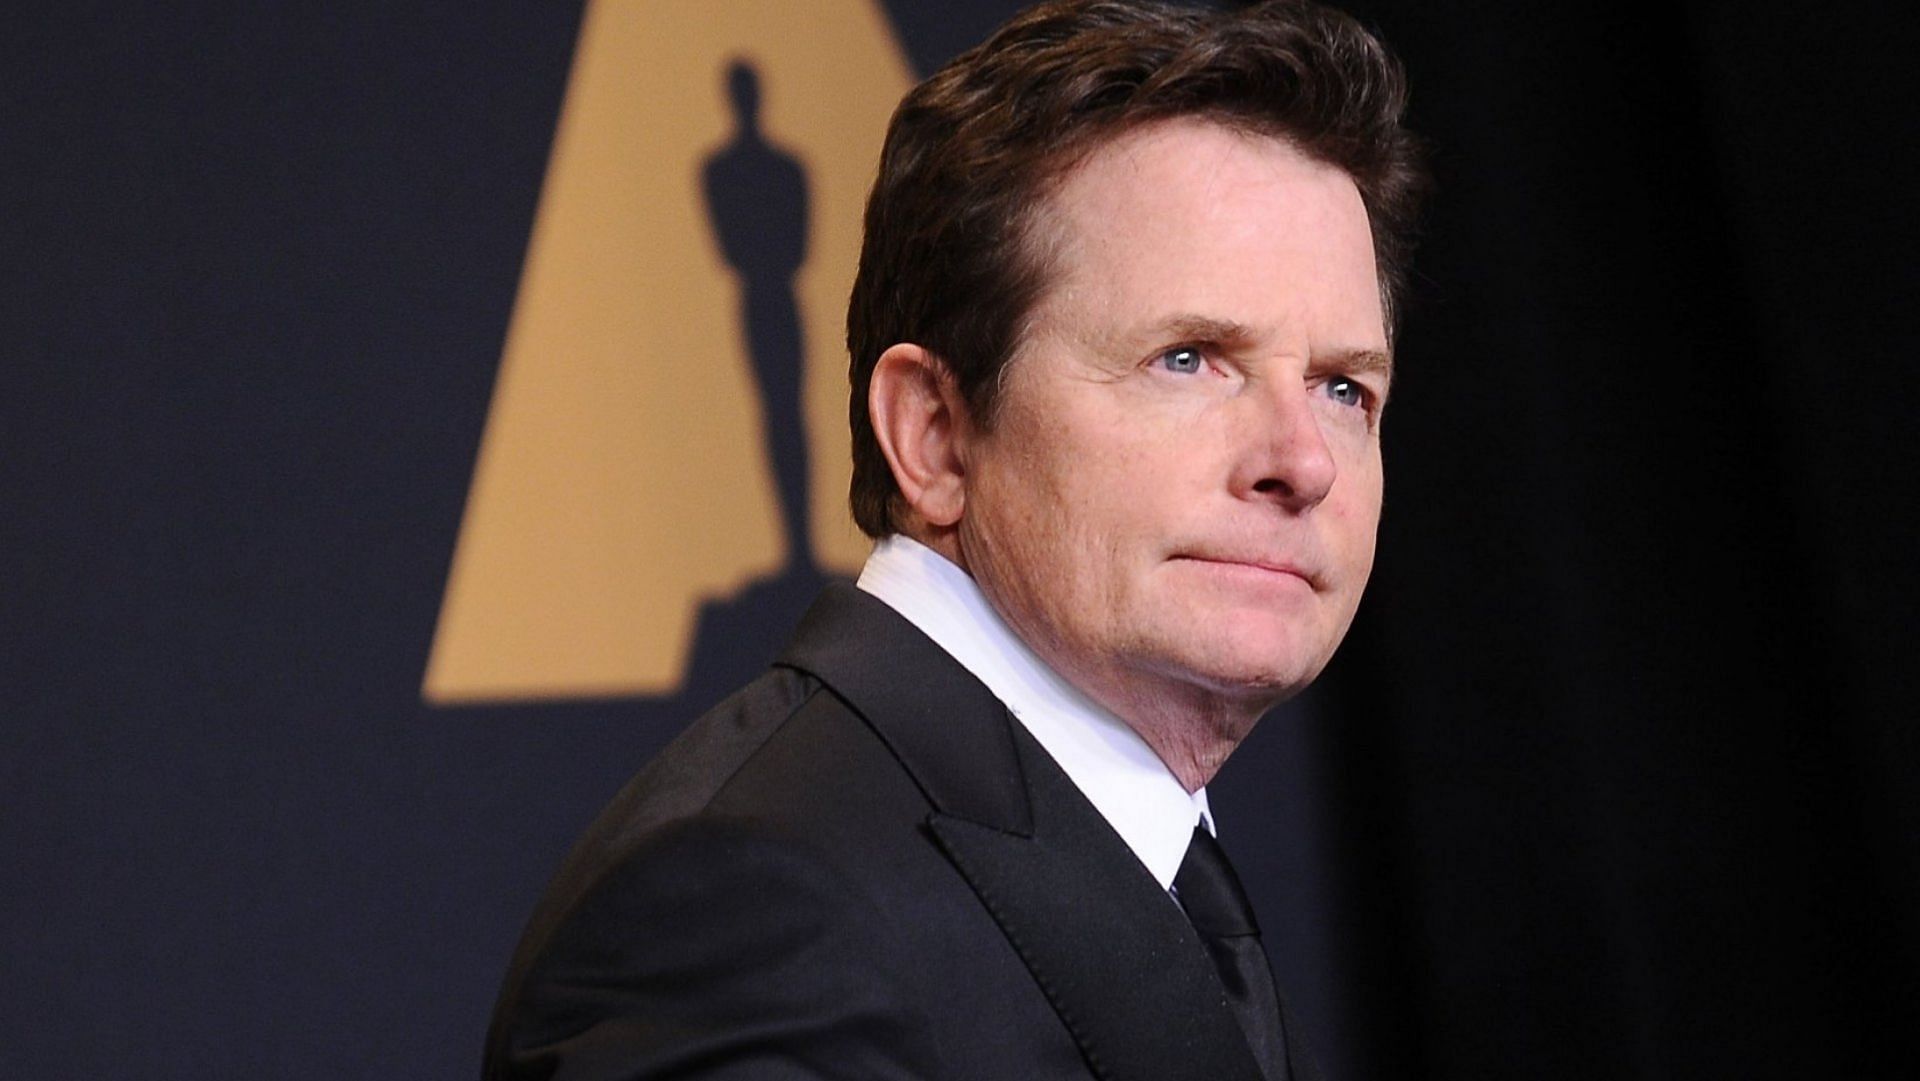 Michael J Fox and Tracy Pollan share 4 kids together. (Image via Getty Images)